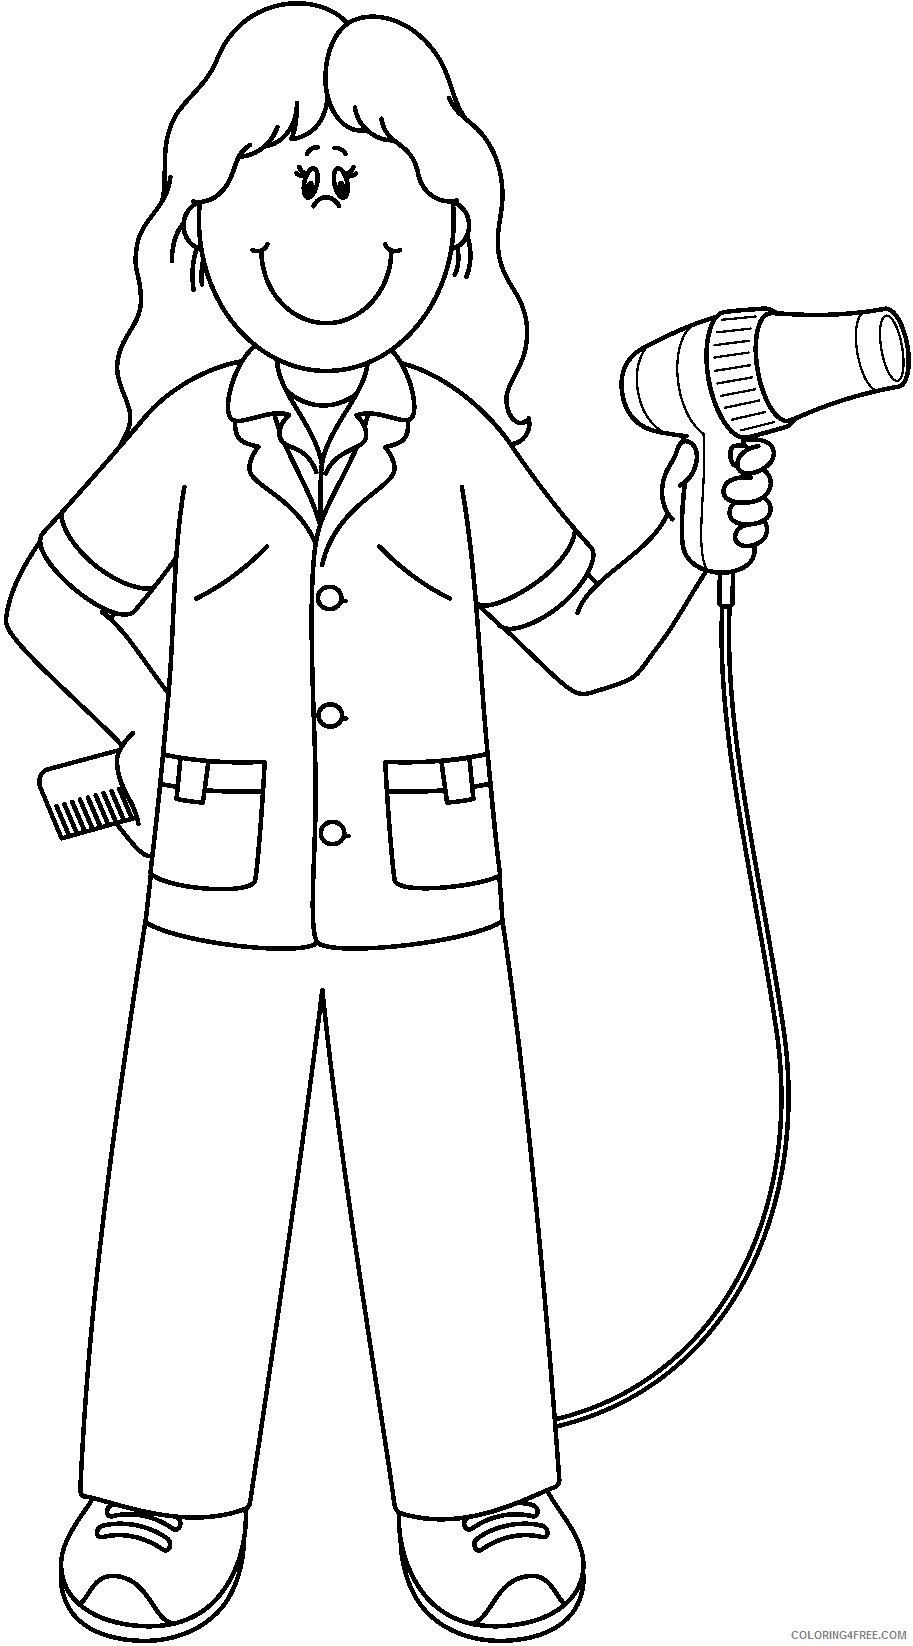 Printable Community Helpers Coloring Pages For Kids Coloring4free Coloring4free Com